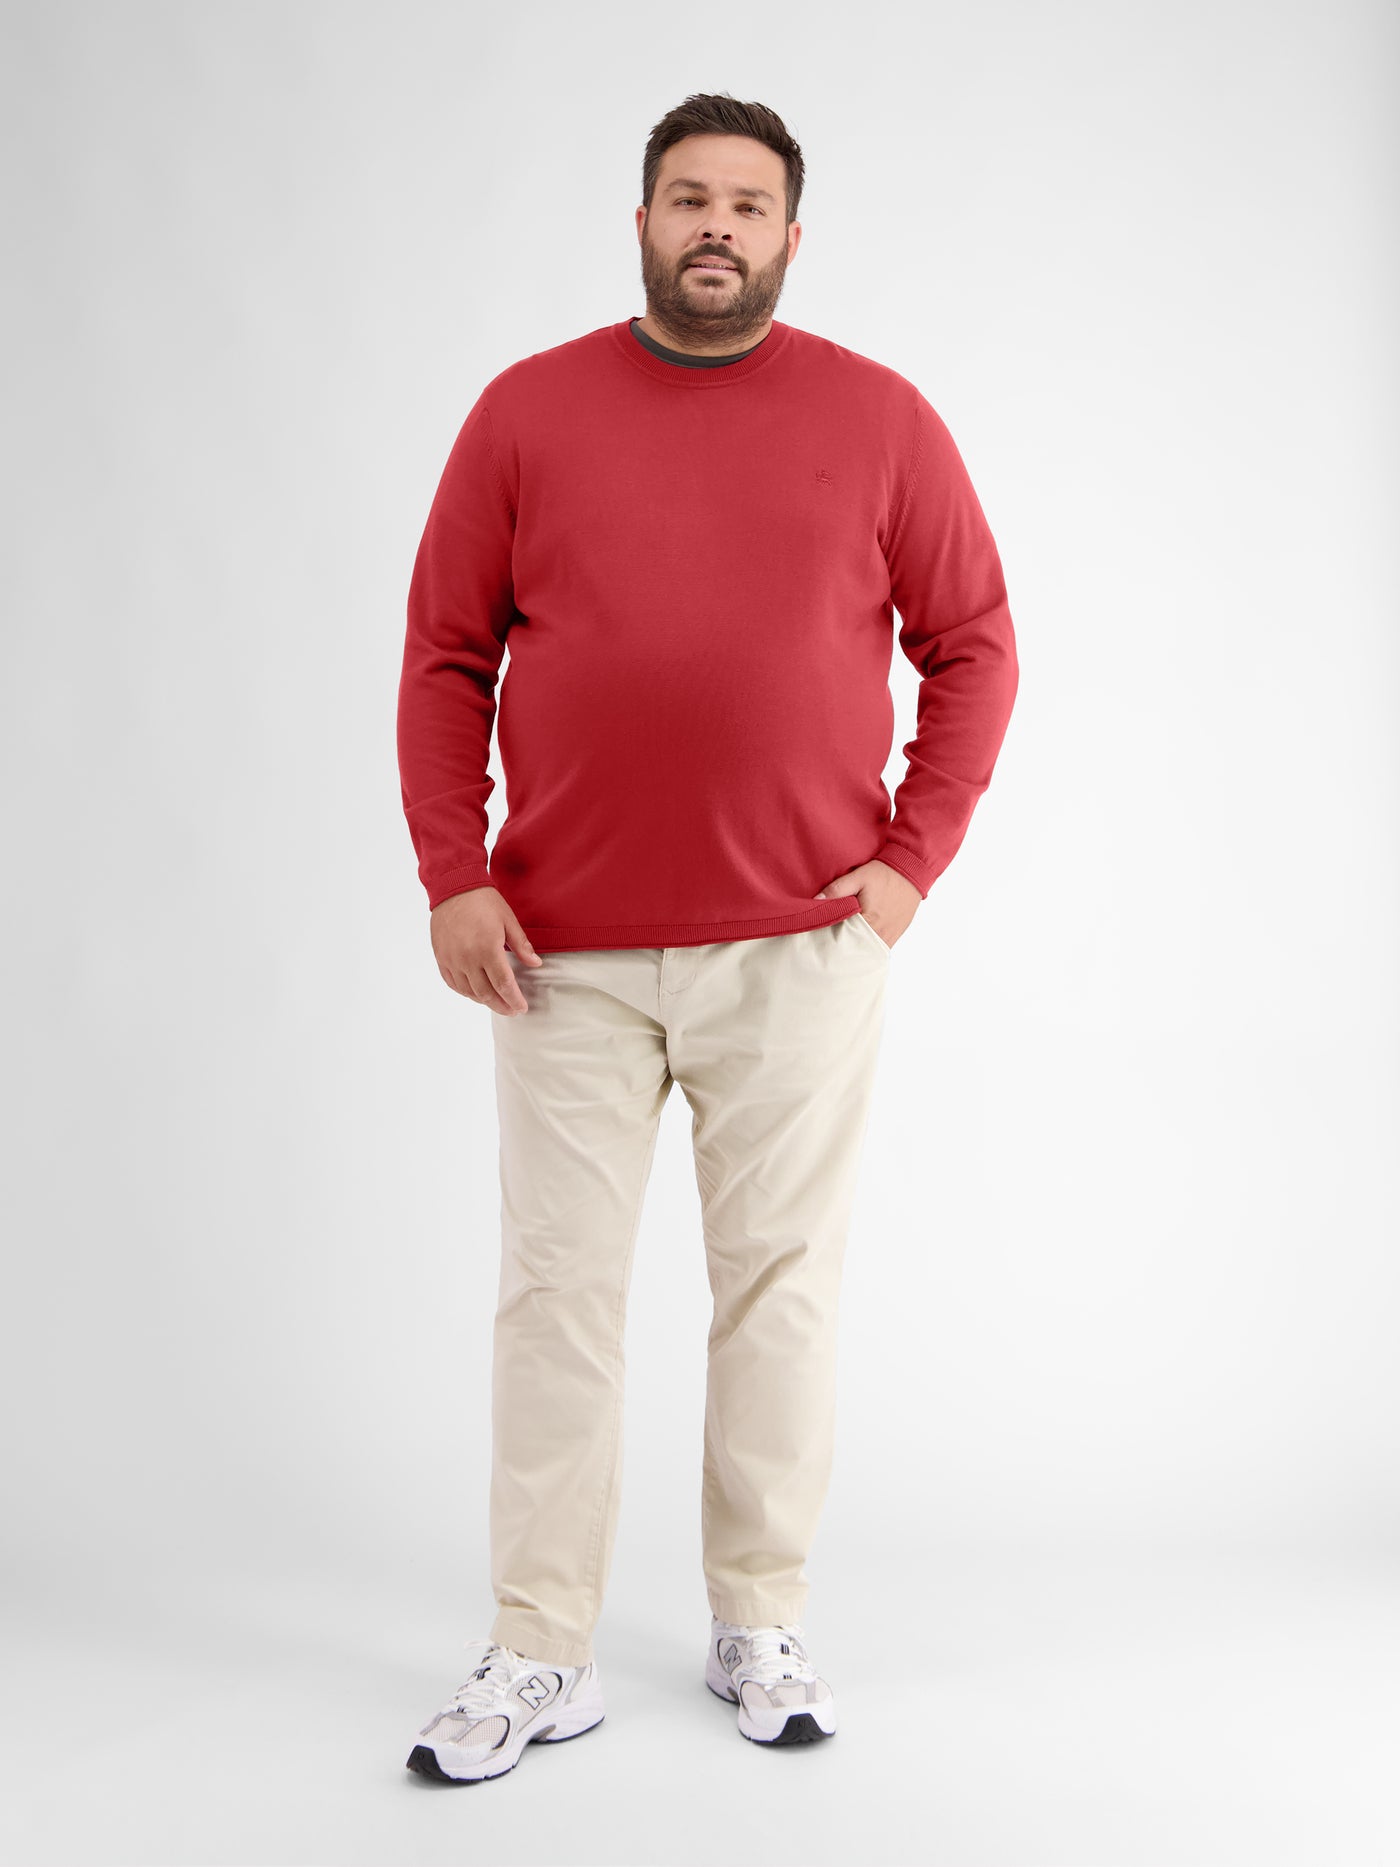 Flat knit sweater with a crew neck